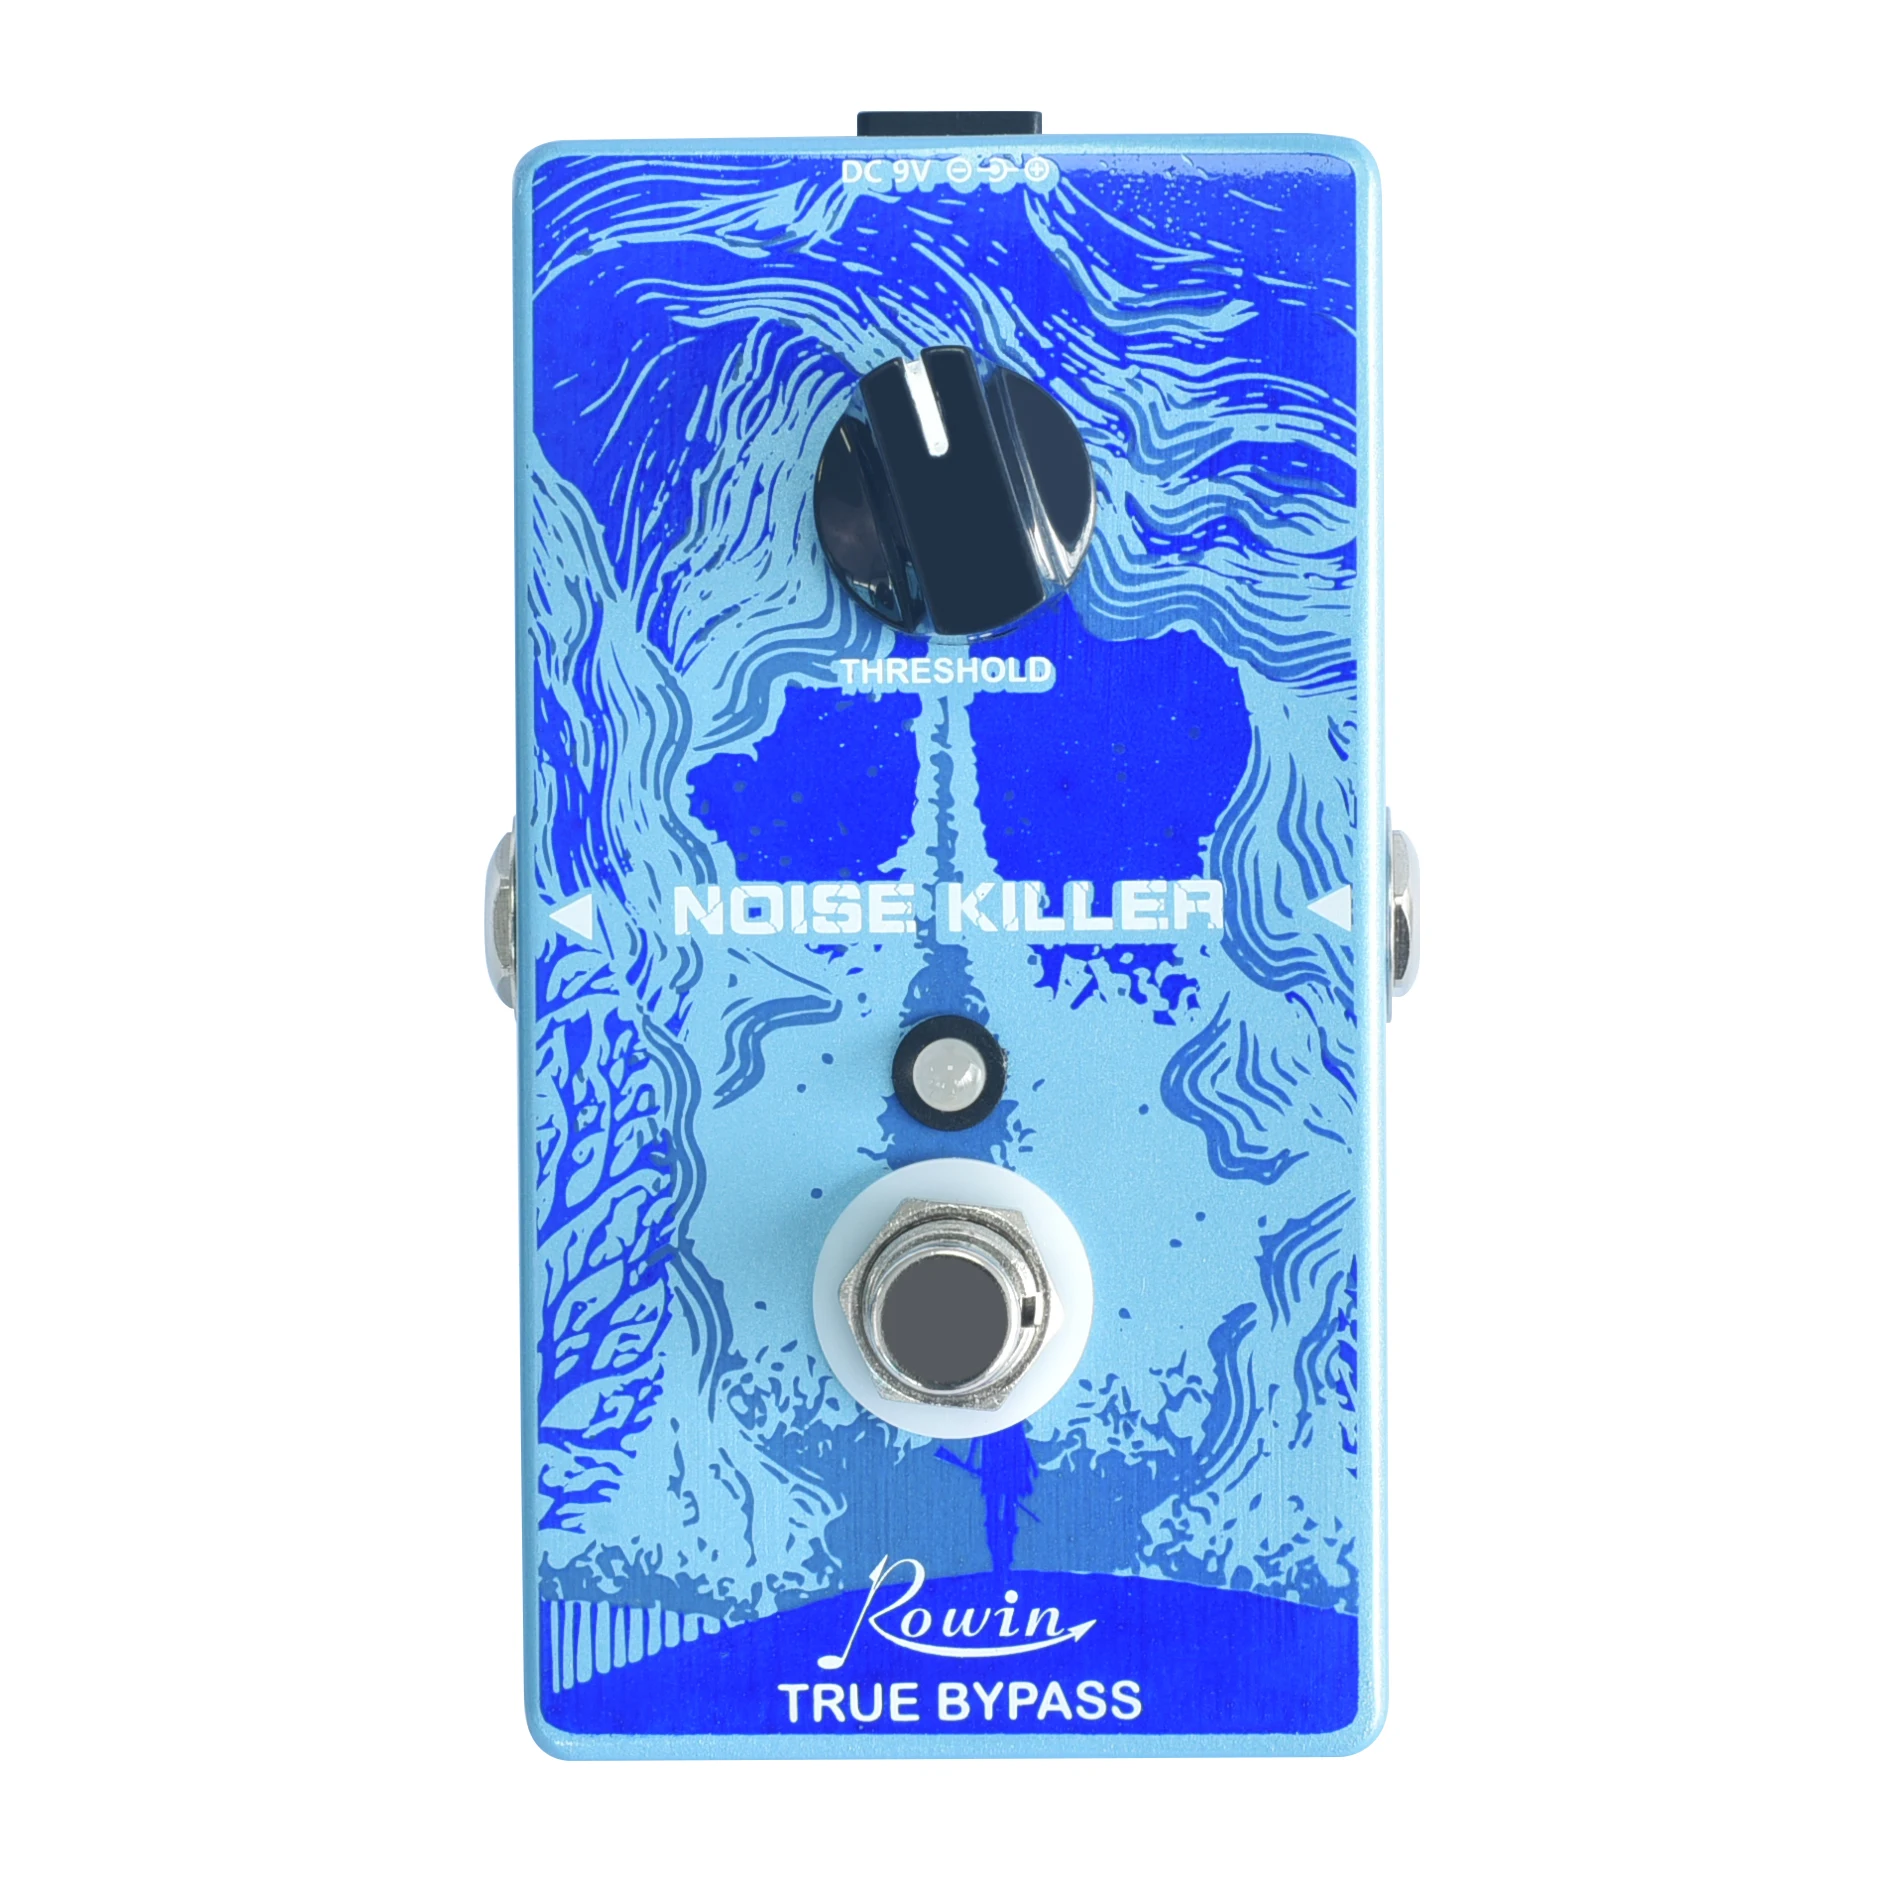 Rowin Noise Killer Effect Pedal For Electric Guitar &Bass Ture Bypass Under Lowest Price&Highest Quality To Provide Clear Sound enlarge